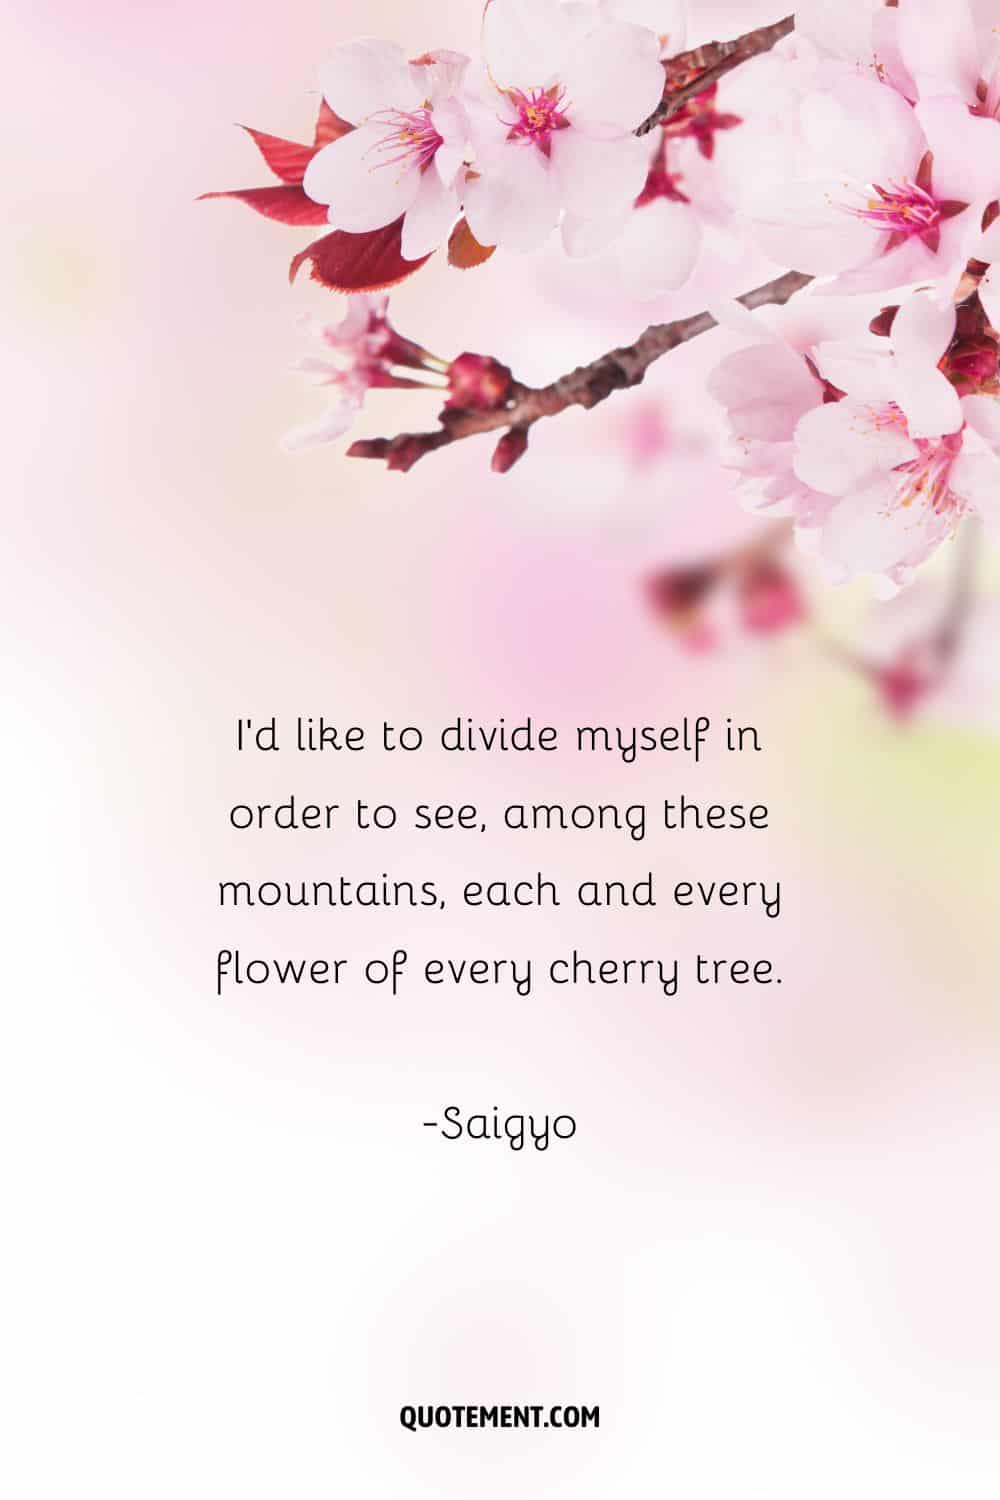 Cherry blossom quote and pinkish sakura in the background.